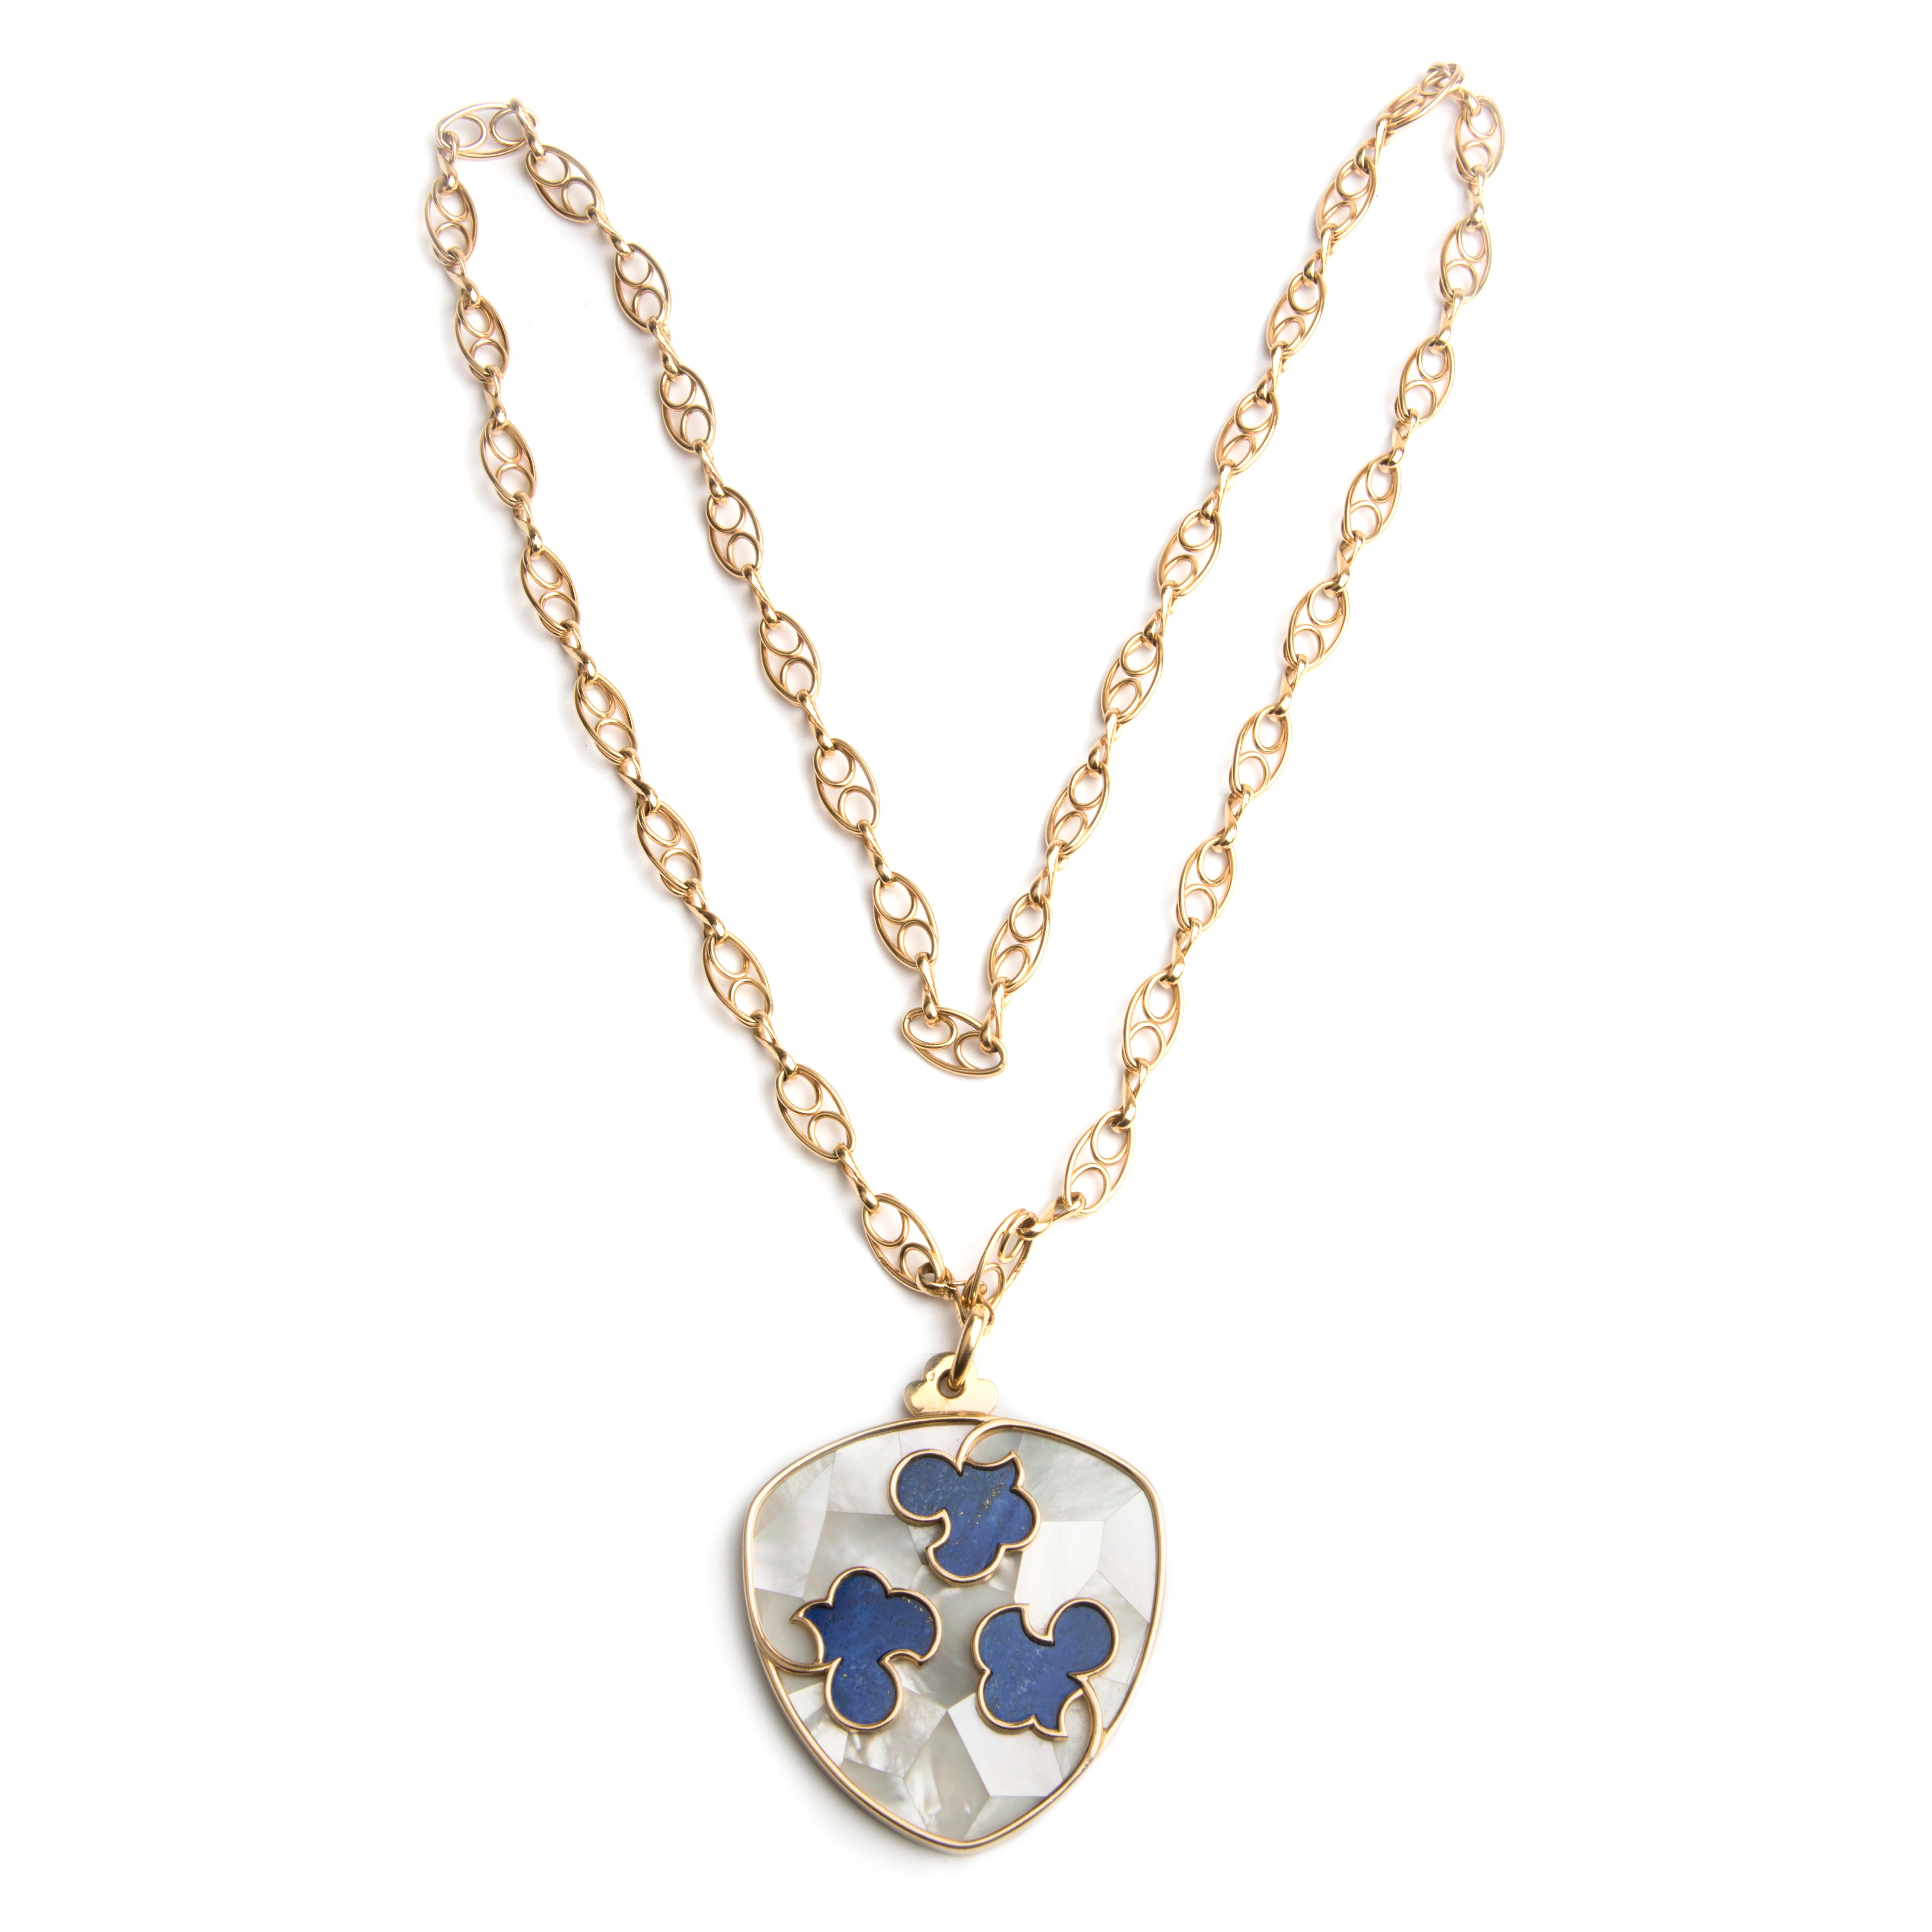 A pendant necklace, designed in the shape of a shield, decorated with lapis lazuli floral motifs on a mother of pearl marquetry font, suspended from a handcrafted link chain.
The pendant signed Cartier Paris, makers mark, French hallmarks, numbered